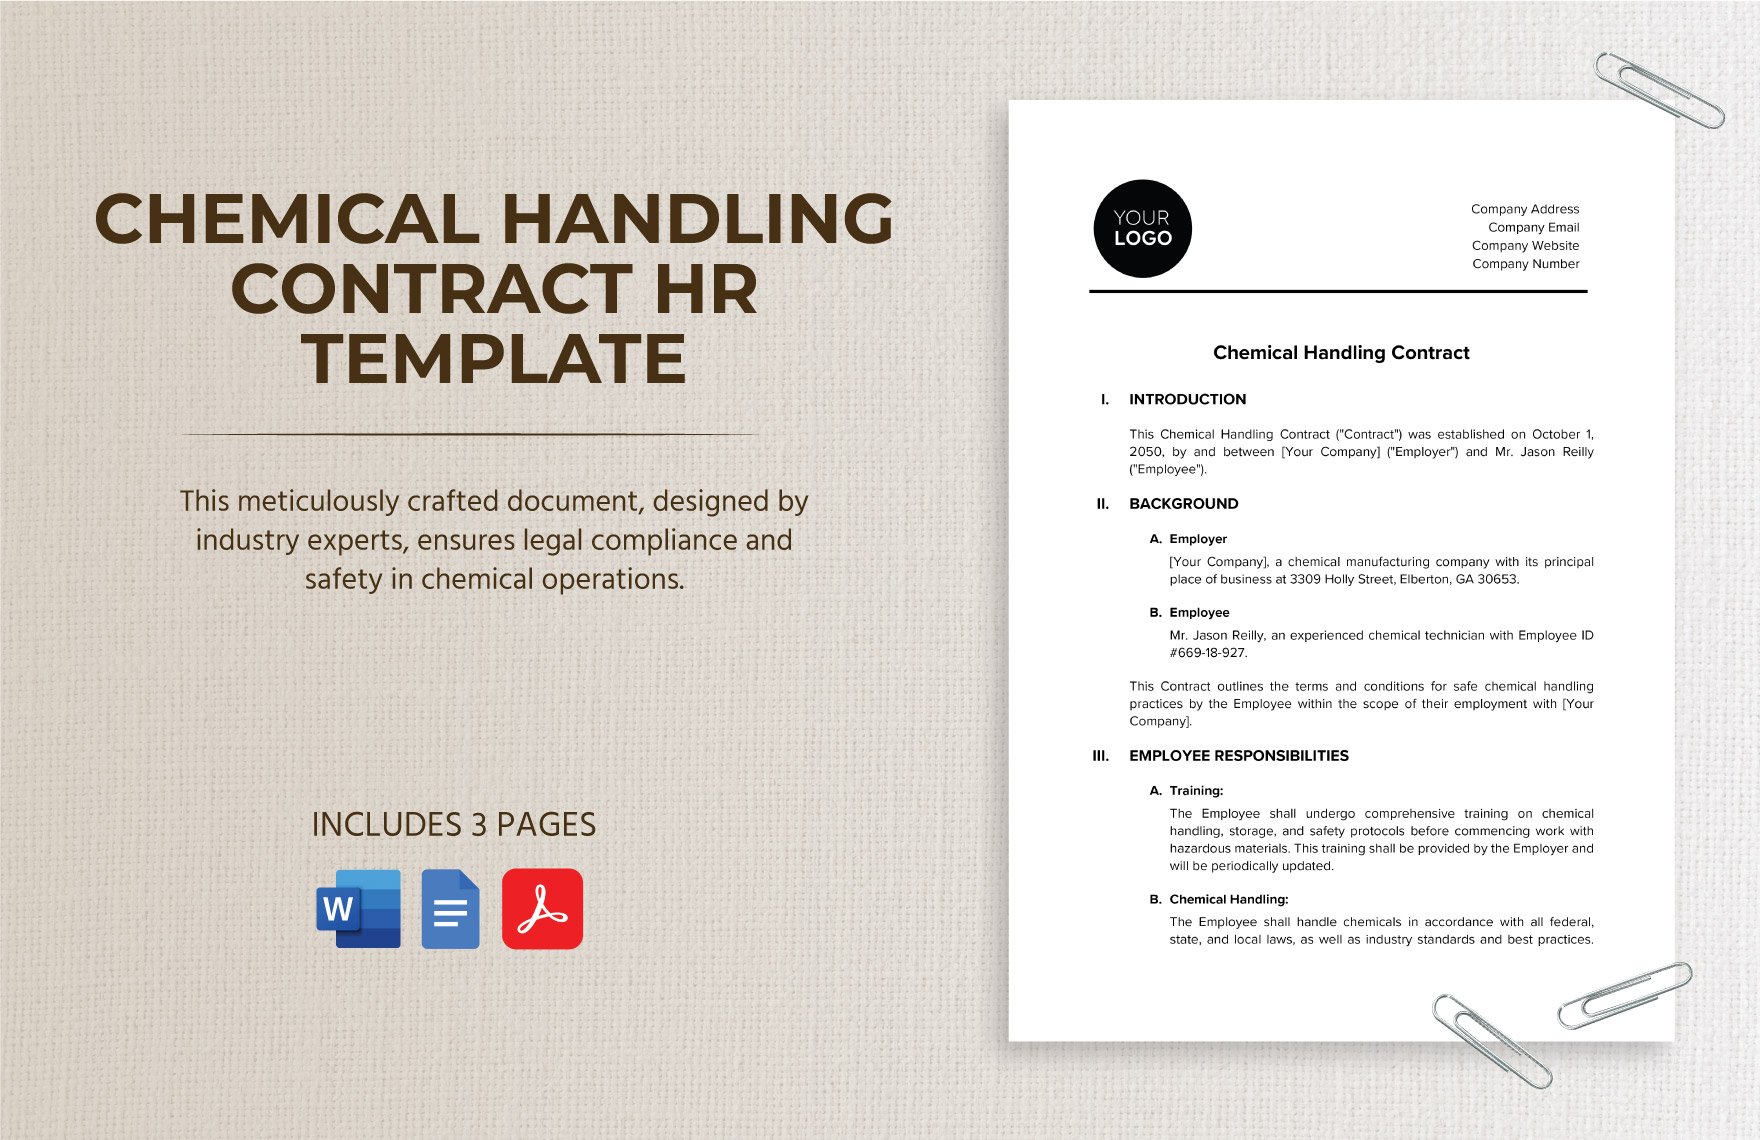 Chemical Handling Contract HR Template in Word, Google Docs, PDF